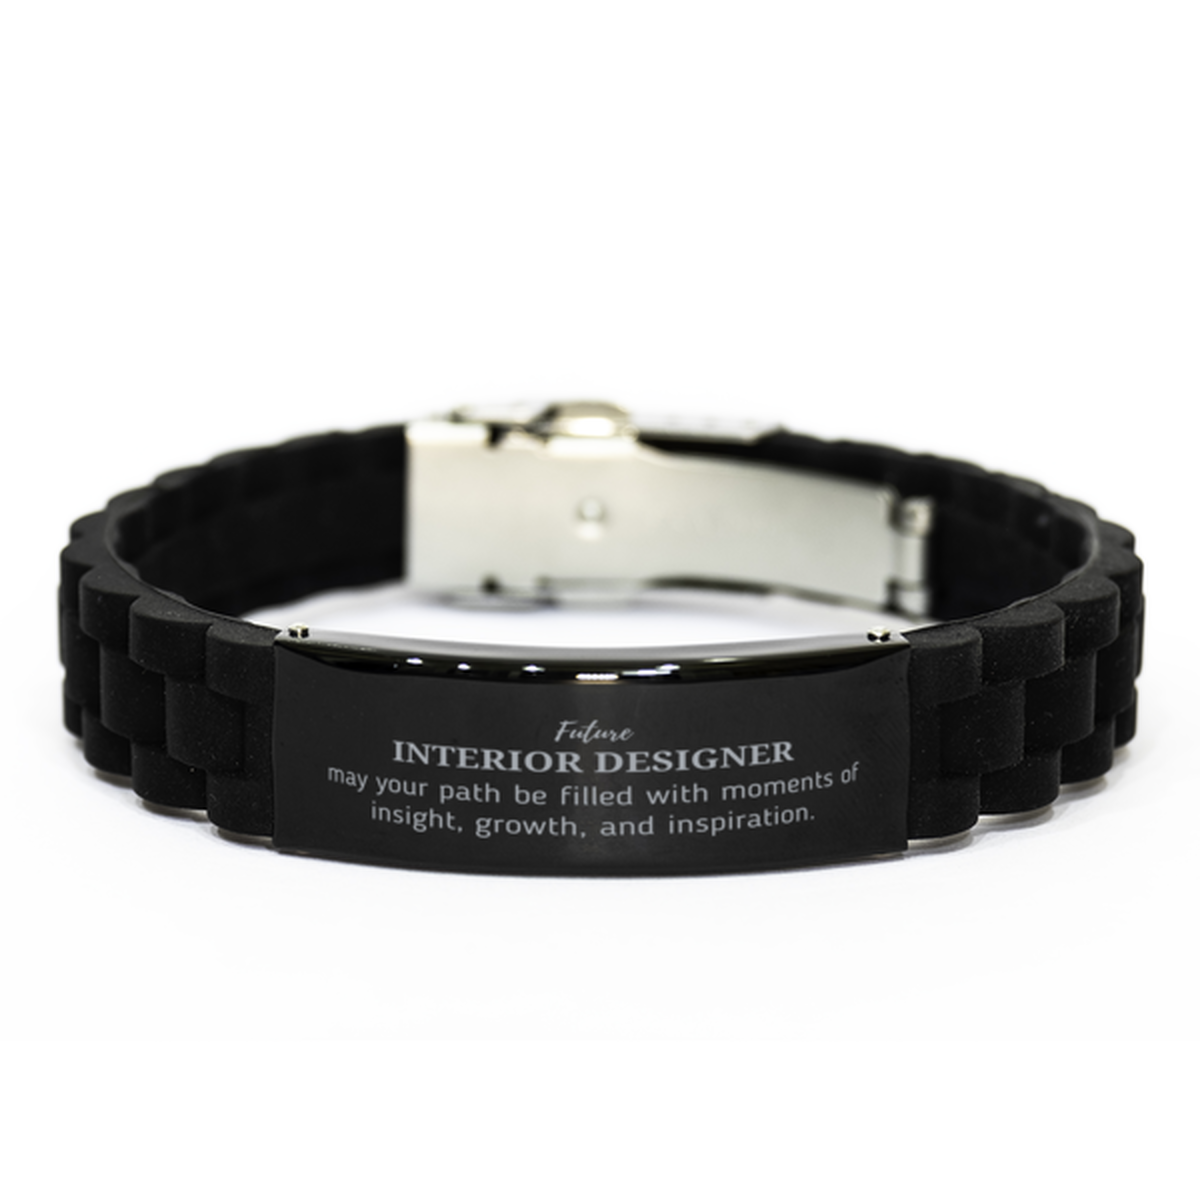 Future Interior Designer Gifts, May your path be filled with moments of insight, Graduation Gifts for New Interior Designer, Christmas Unique Black Glidelock Clasp Bracelet For Men, Women, Friends